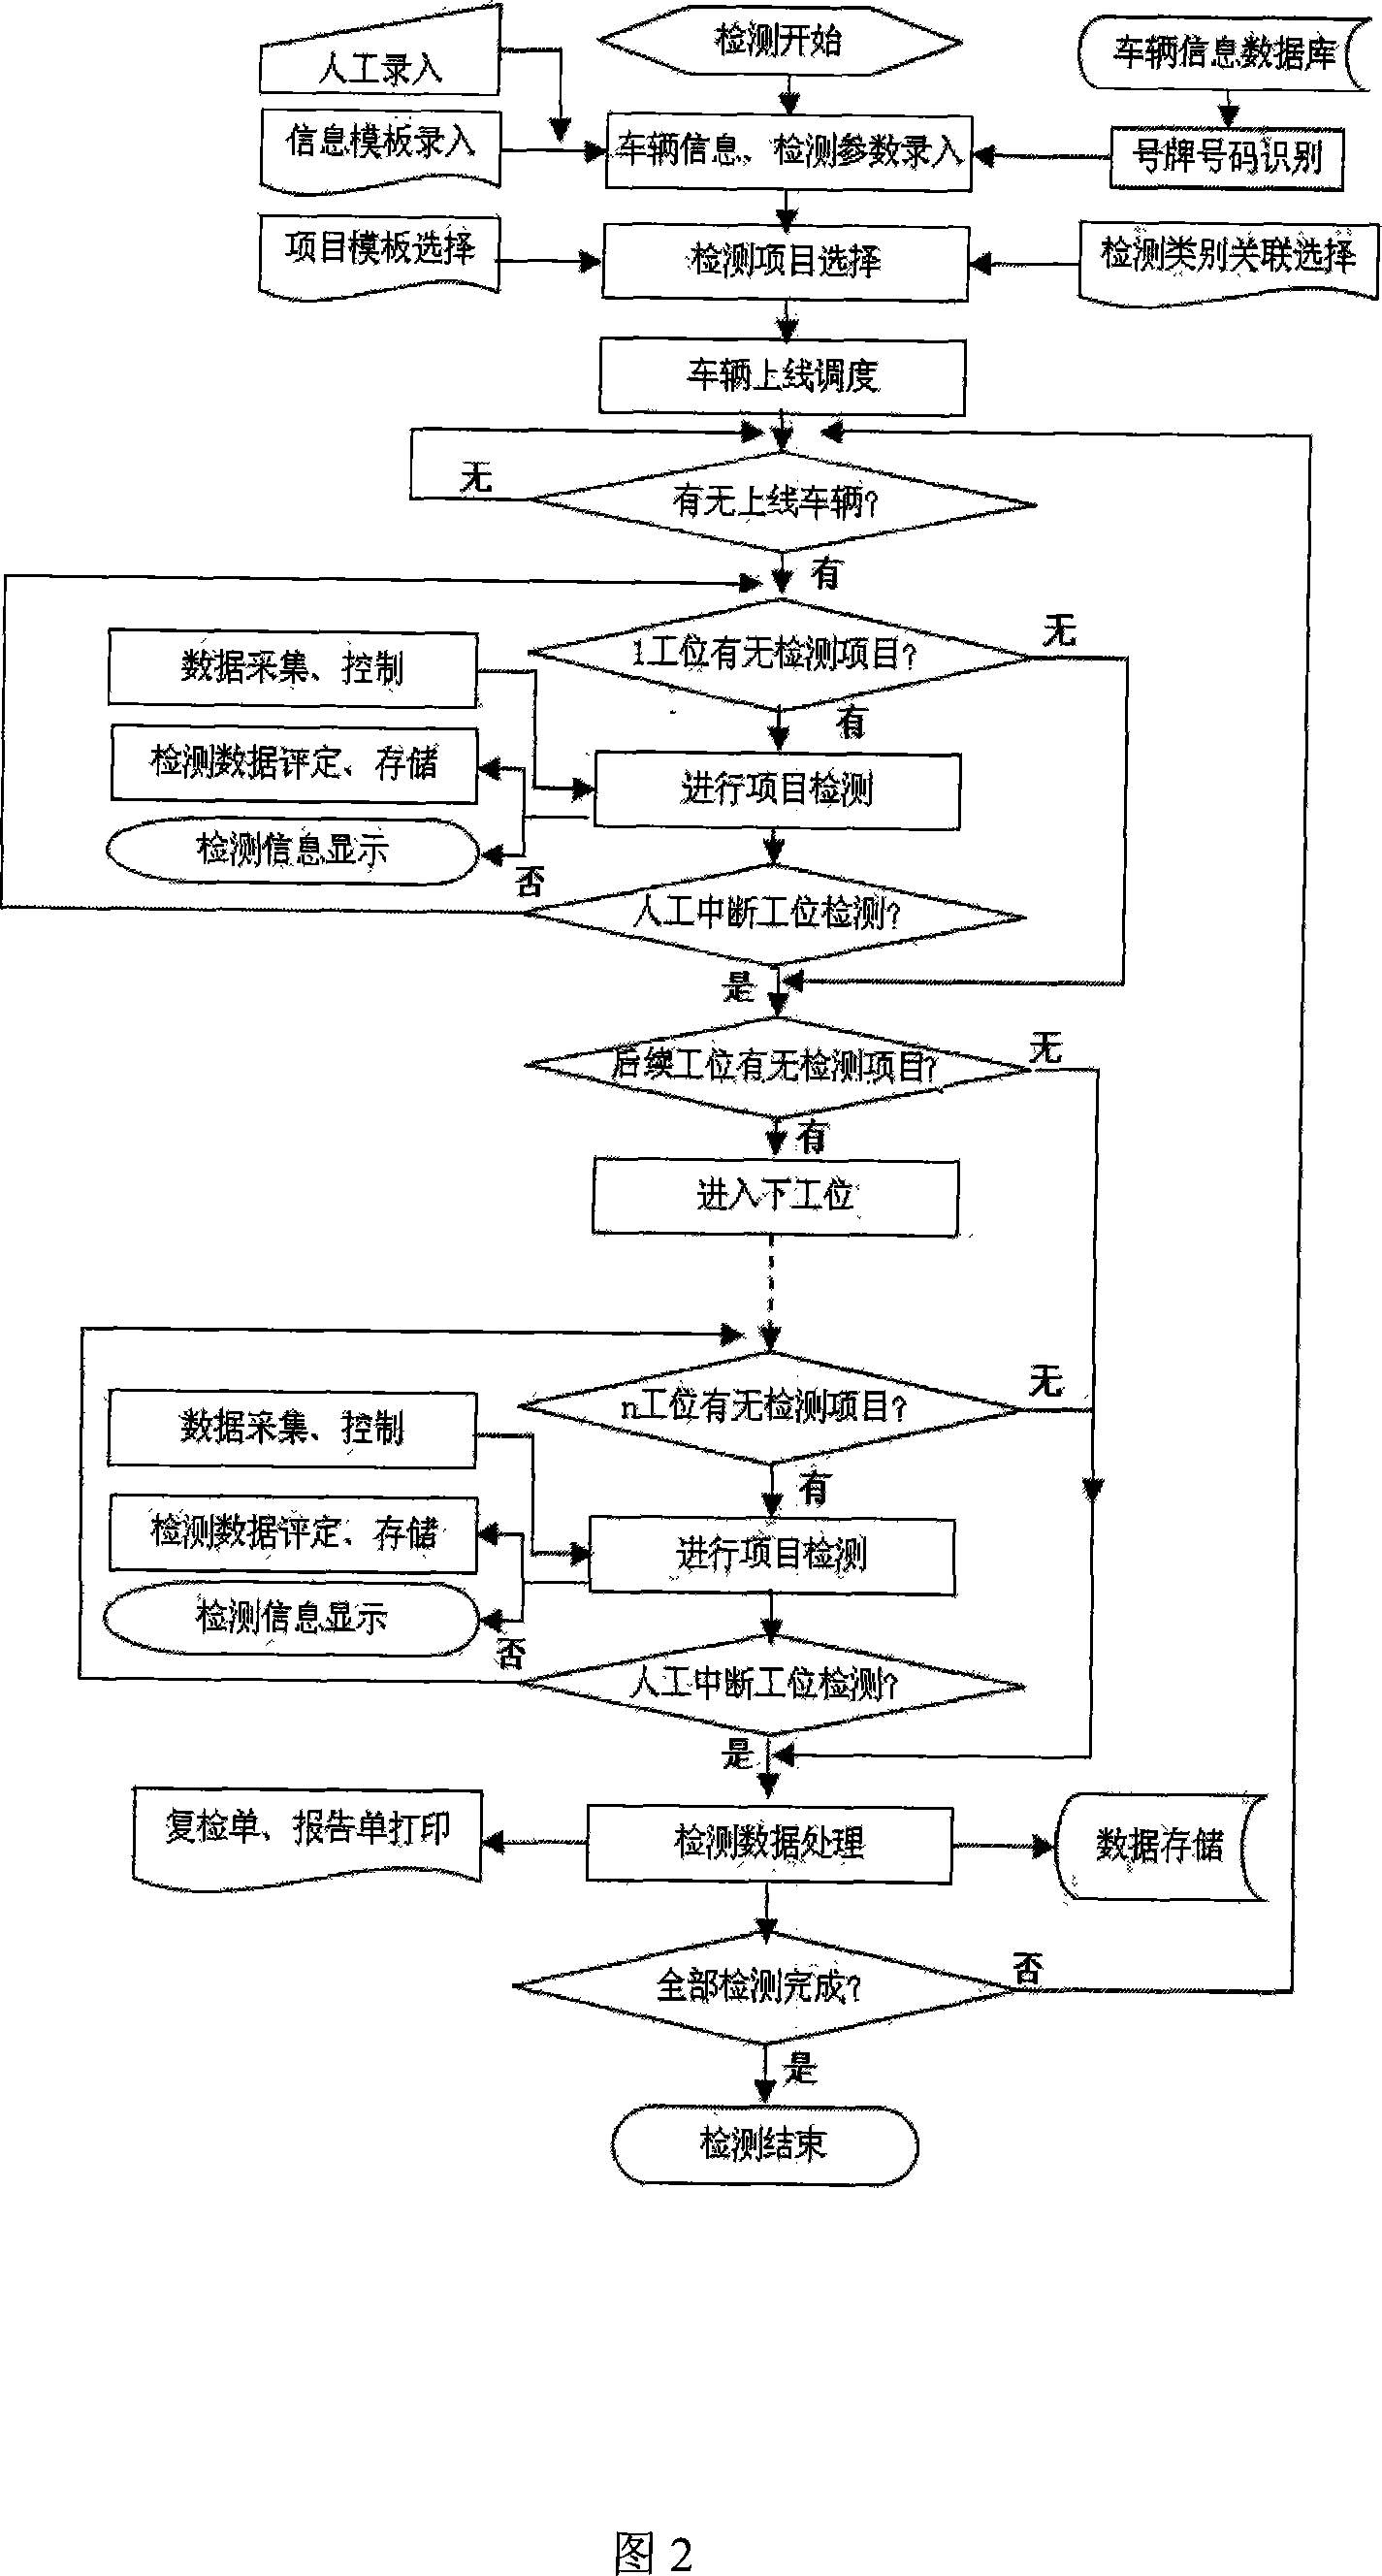 Automatic motor vehicle detecting system and its operation process